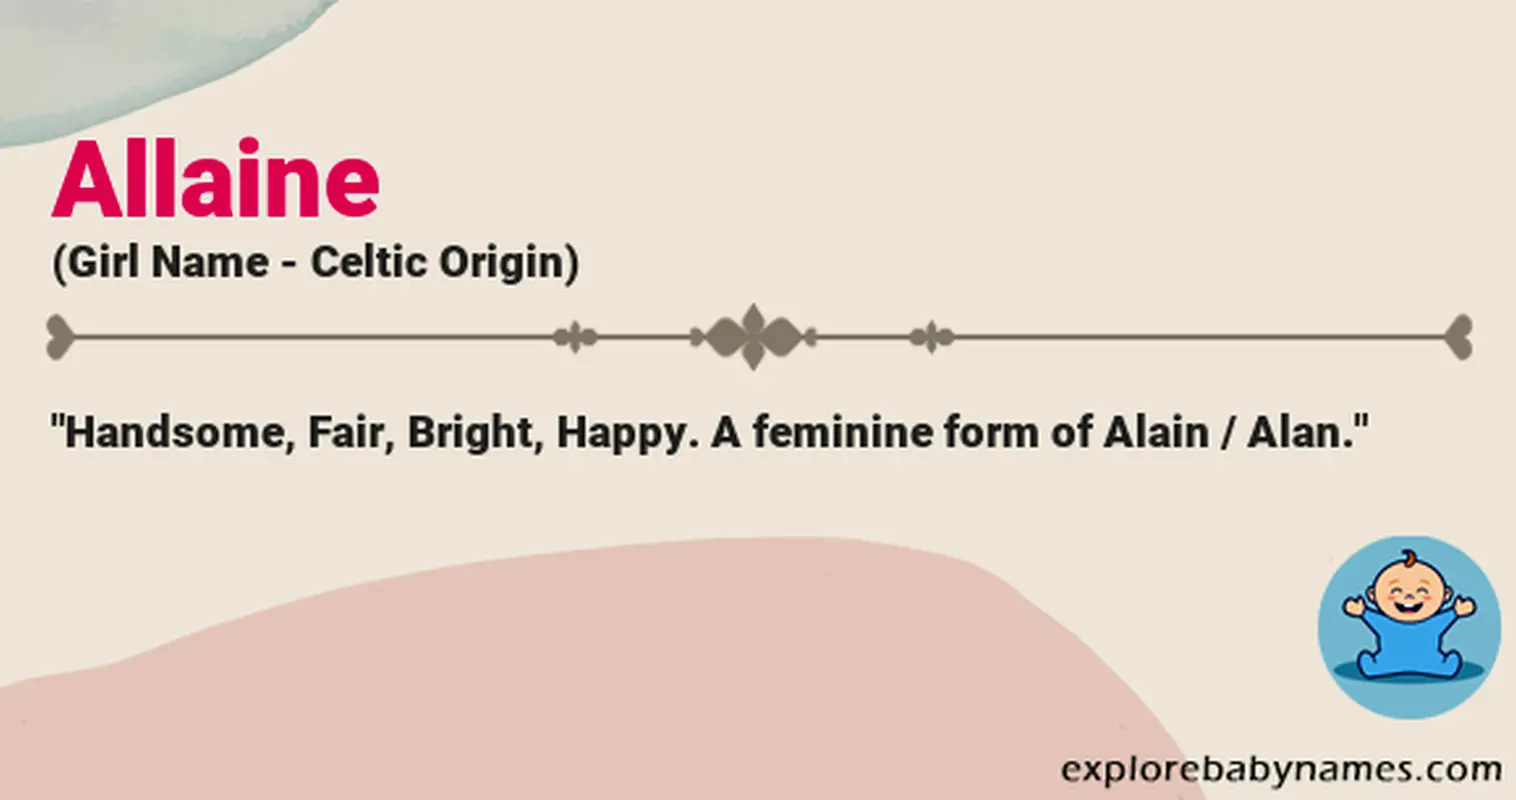 Meaning of Allaine